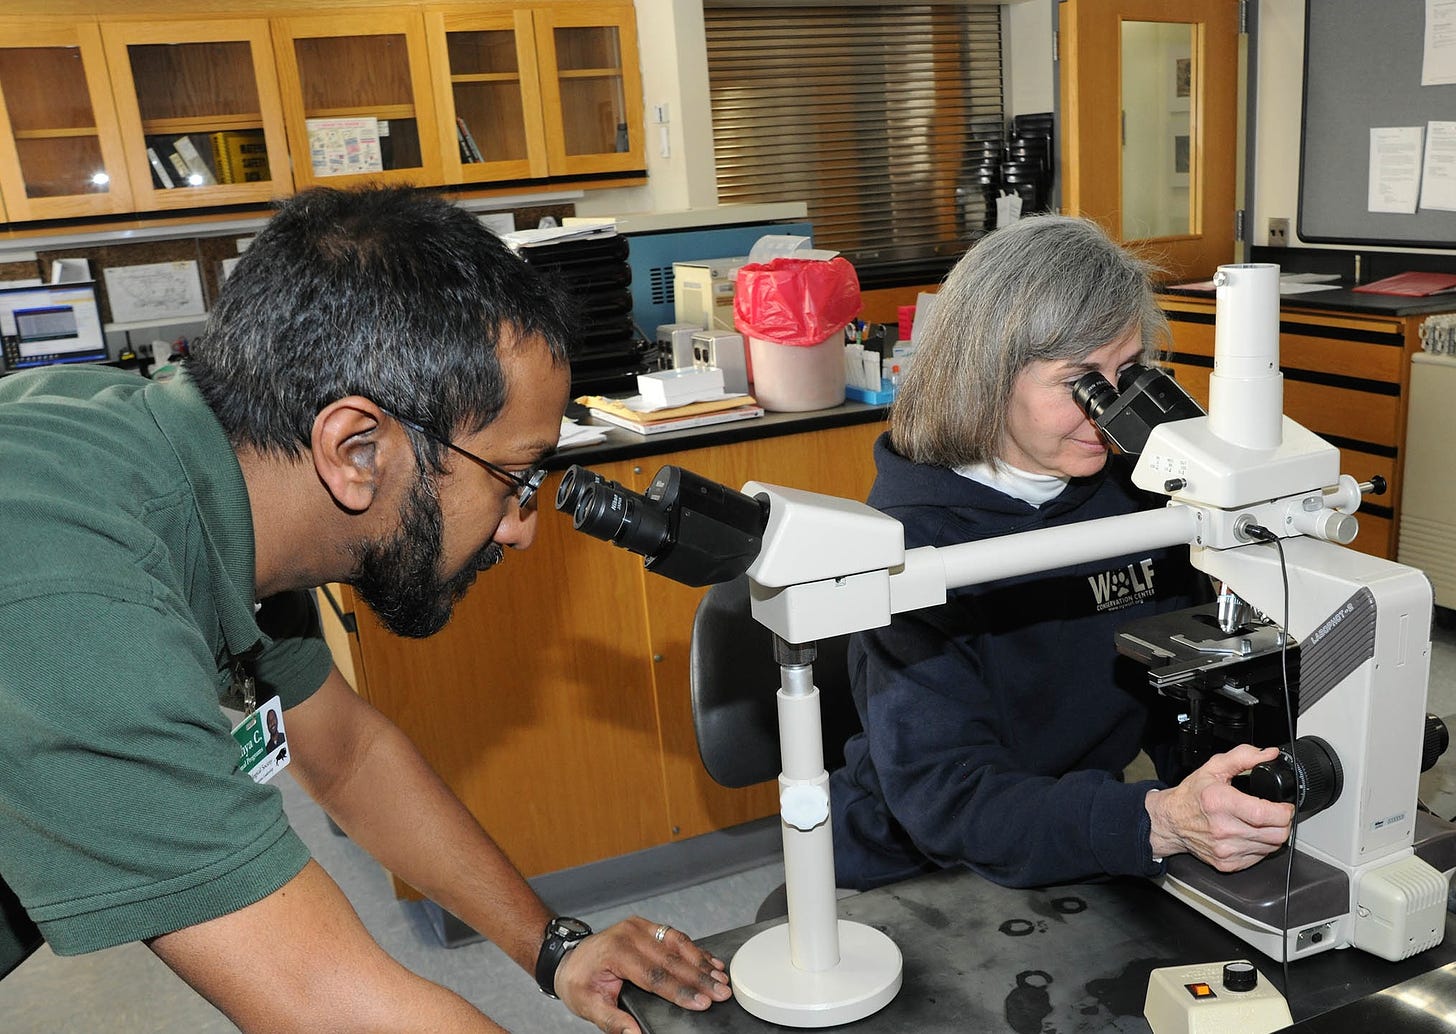 Sathya Chinnadurai, DVM, DVM, MS, Dipl. ACZM, Dipl. ACVAA, associate veterinarian for the Chicago Zoological Society, and Cheryl Asa, Ph.D., director of research for St. Louis Zoo, look at the quality of the Mexican gray wolf sperm under a microscope. (Photo credit: Jim Schulz/Chicago Zoological Society)